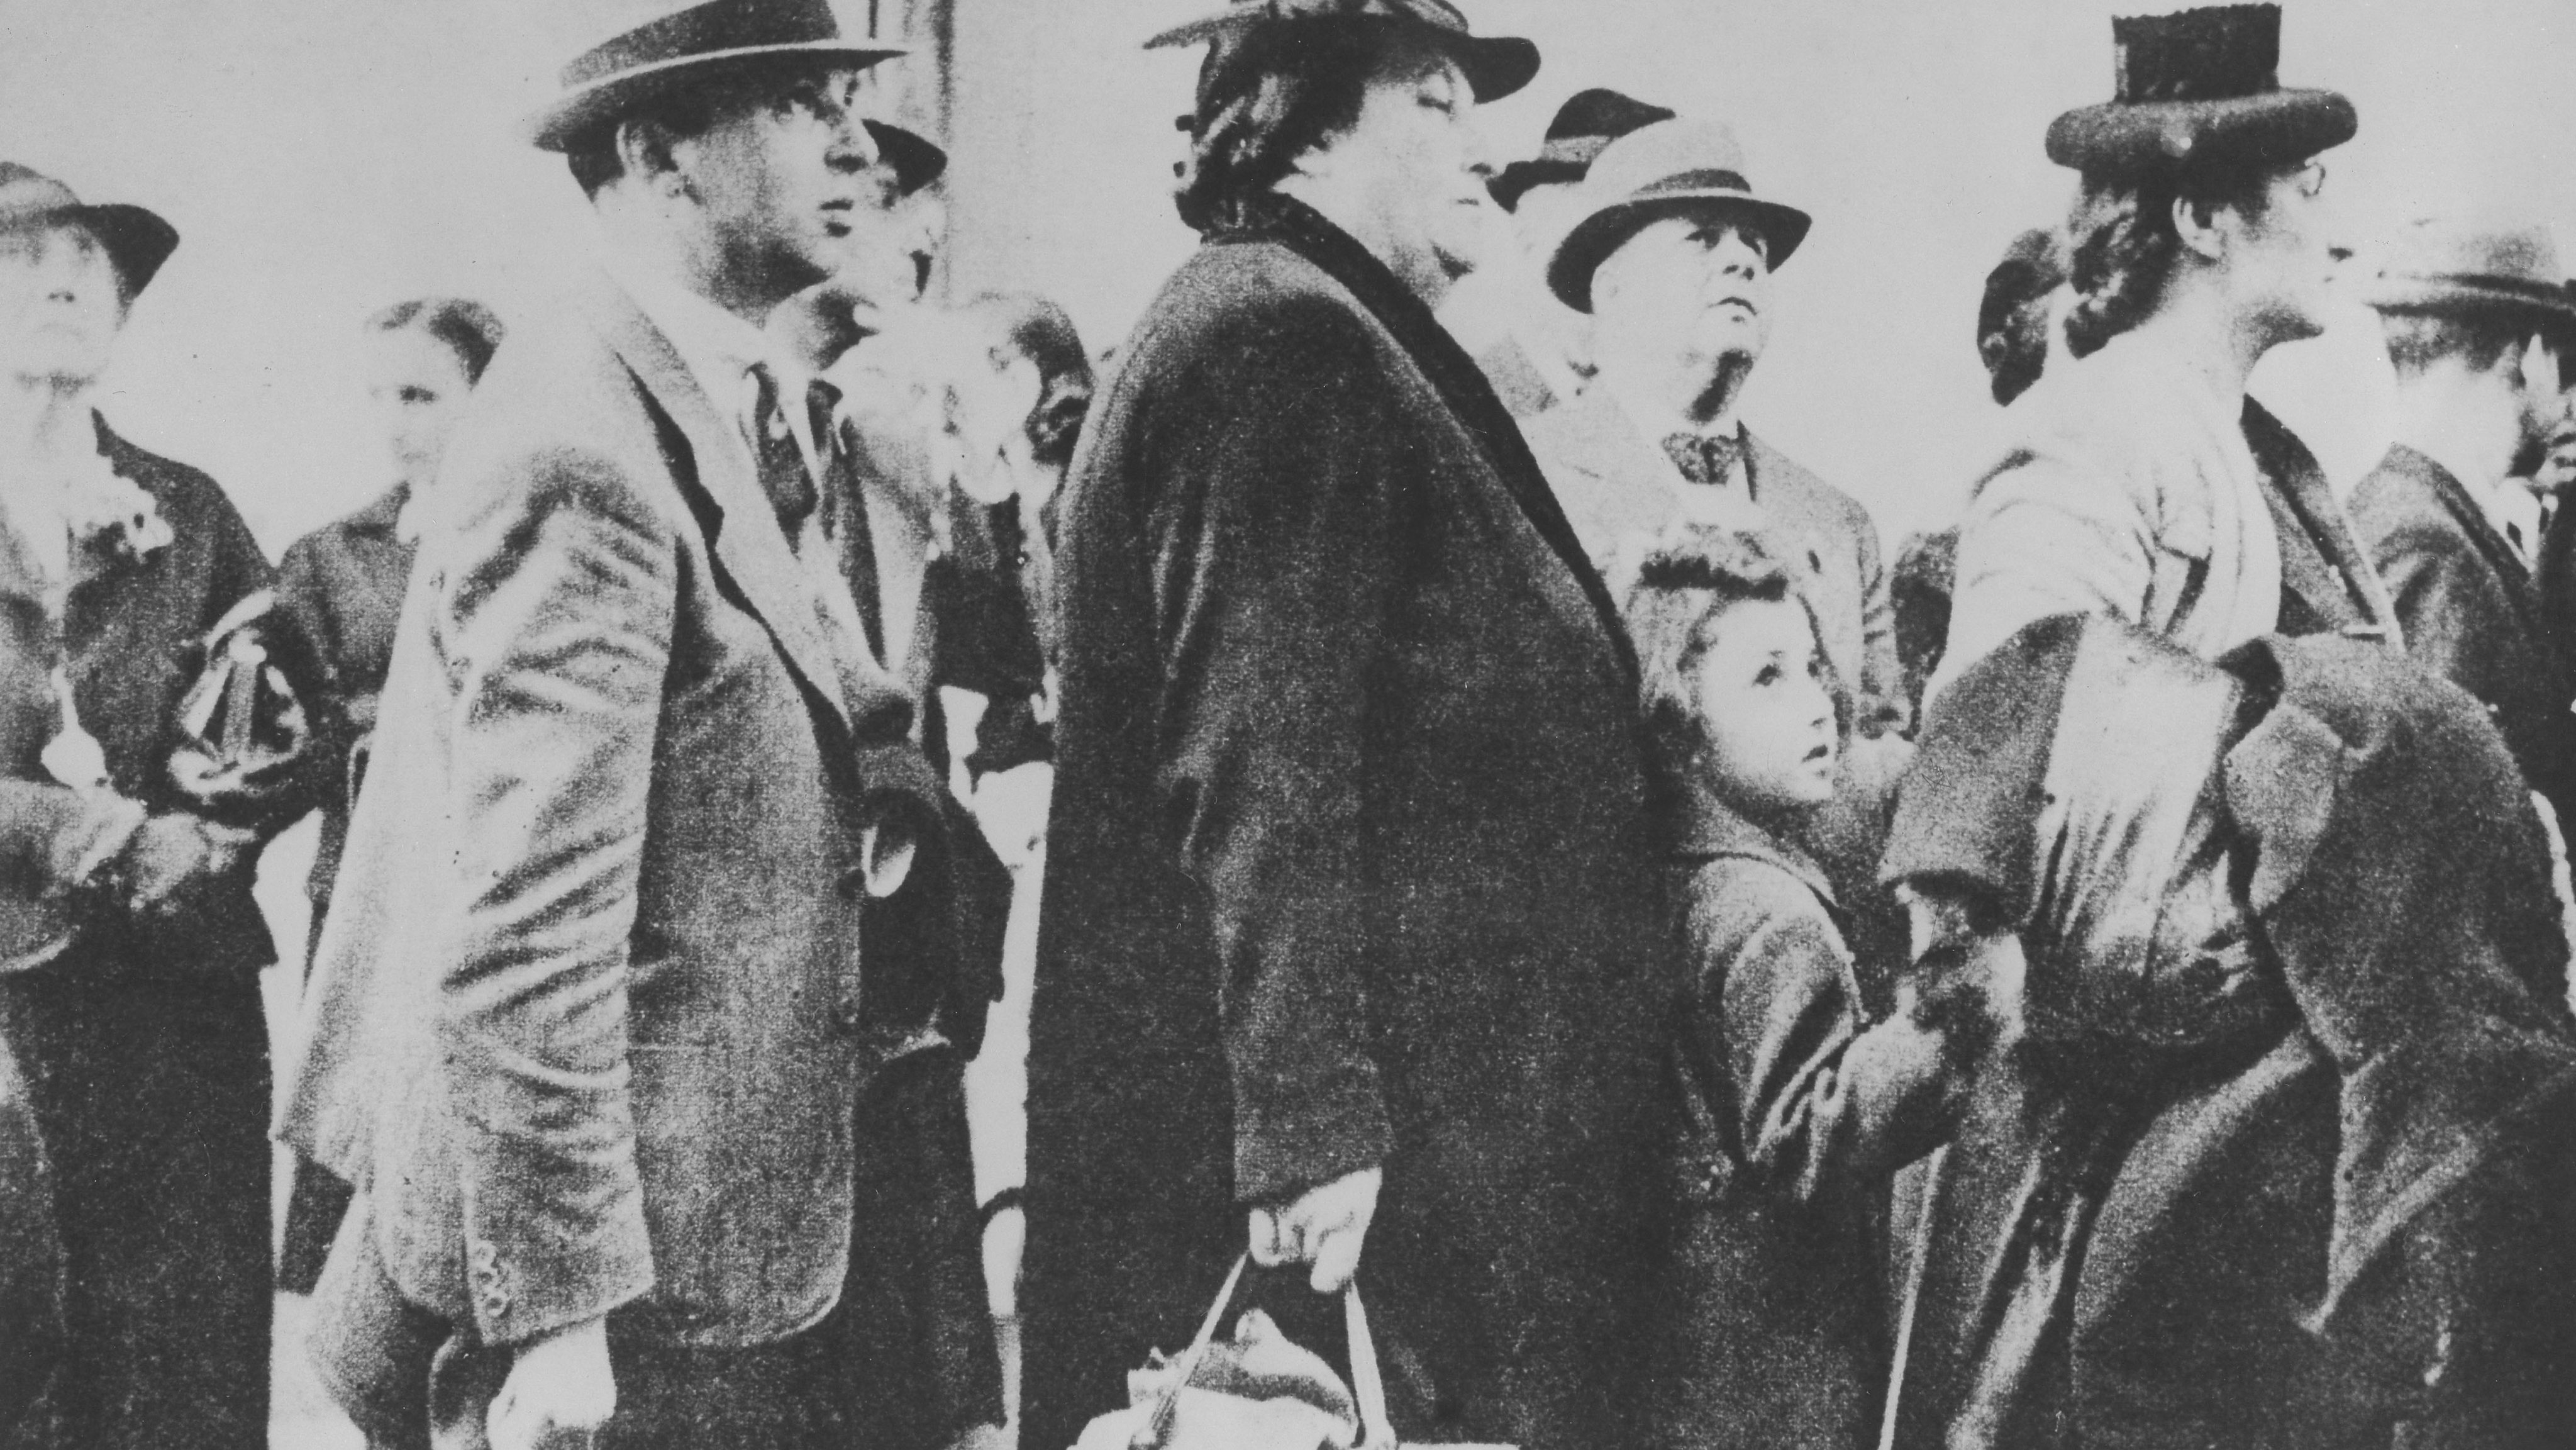 Germany, Third Reich - persecution of Jews 1939-45, emigration Embarkation of refugees in Lisbon